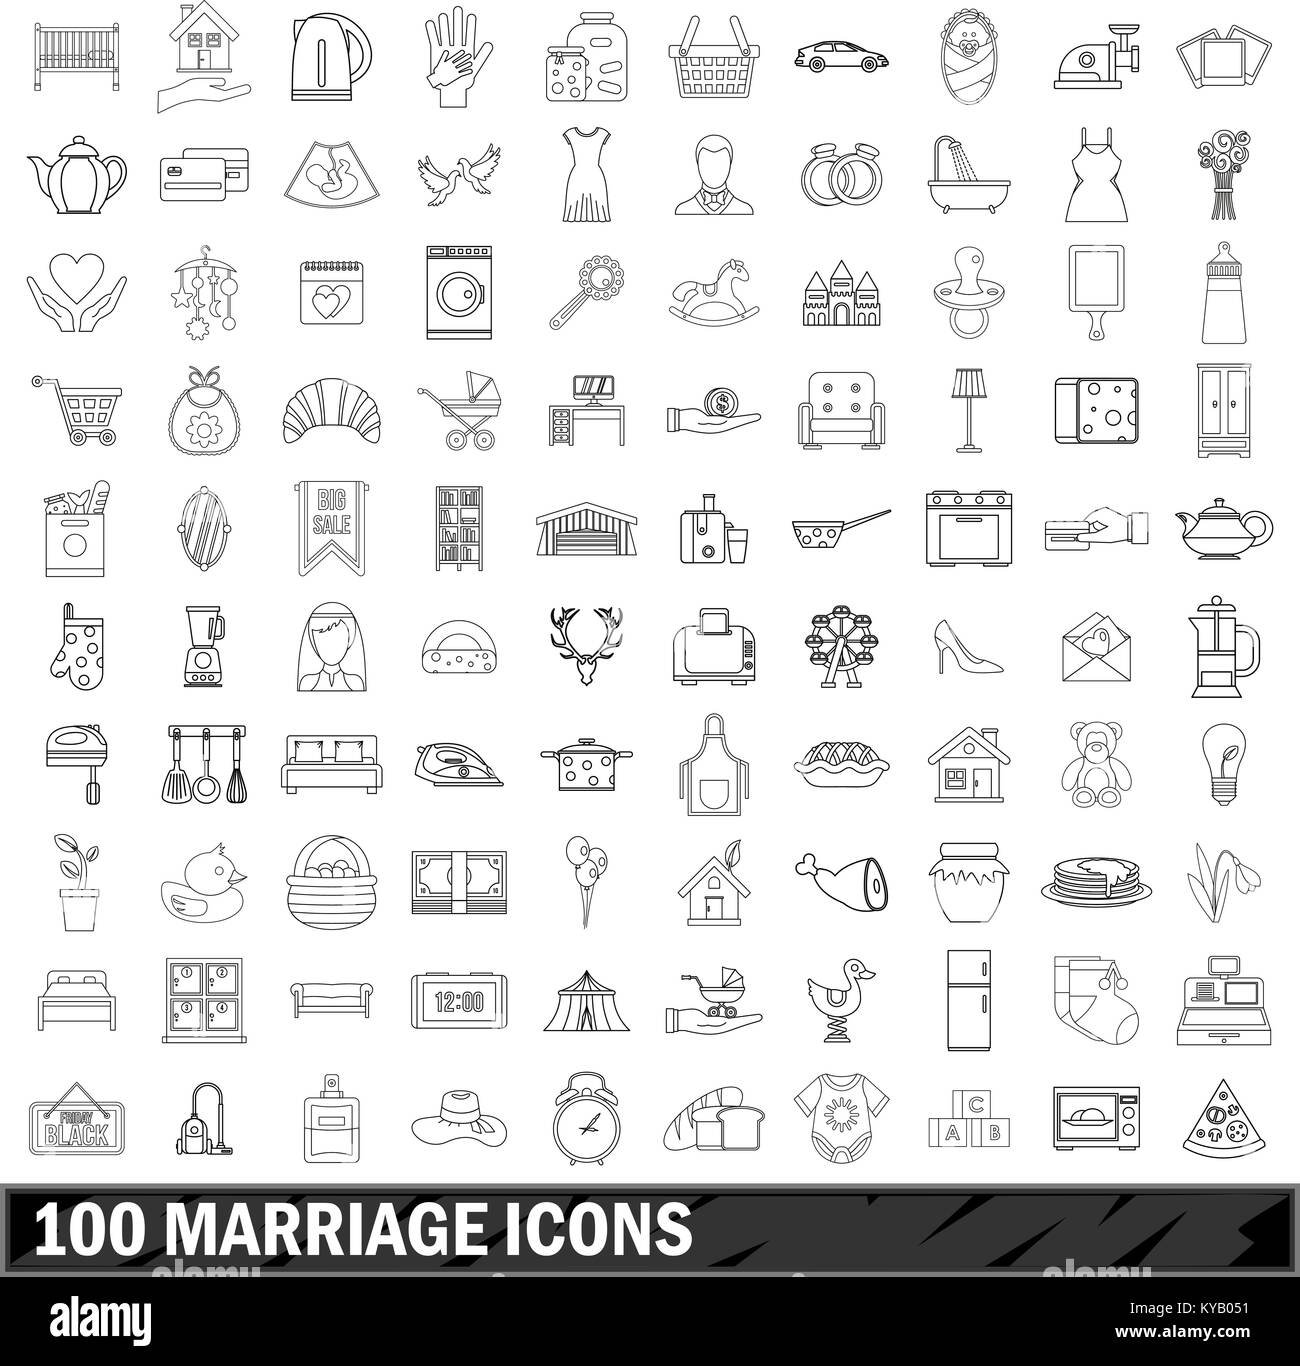 100 marriage icons set in outline style for any design vector illustration Stock Vector